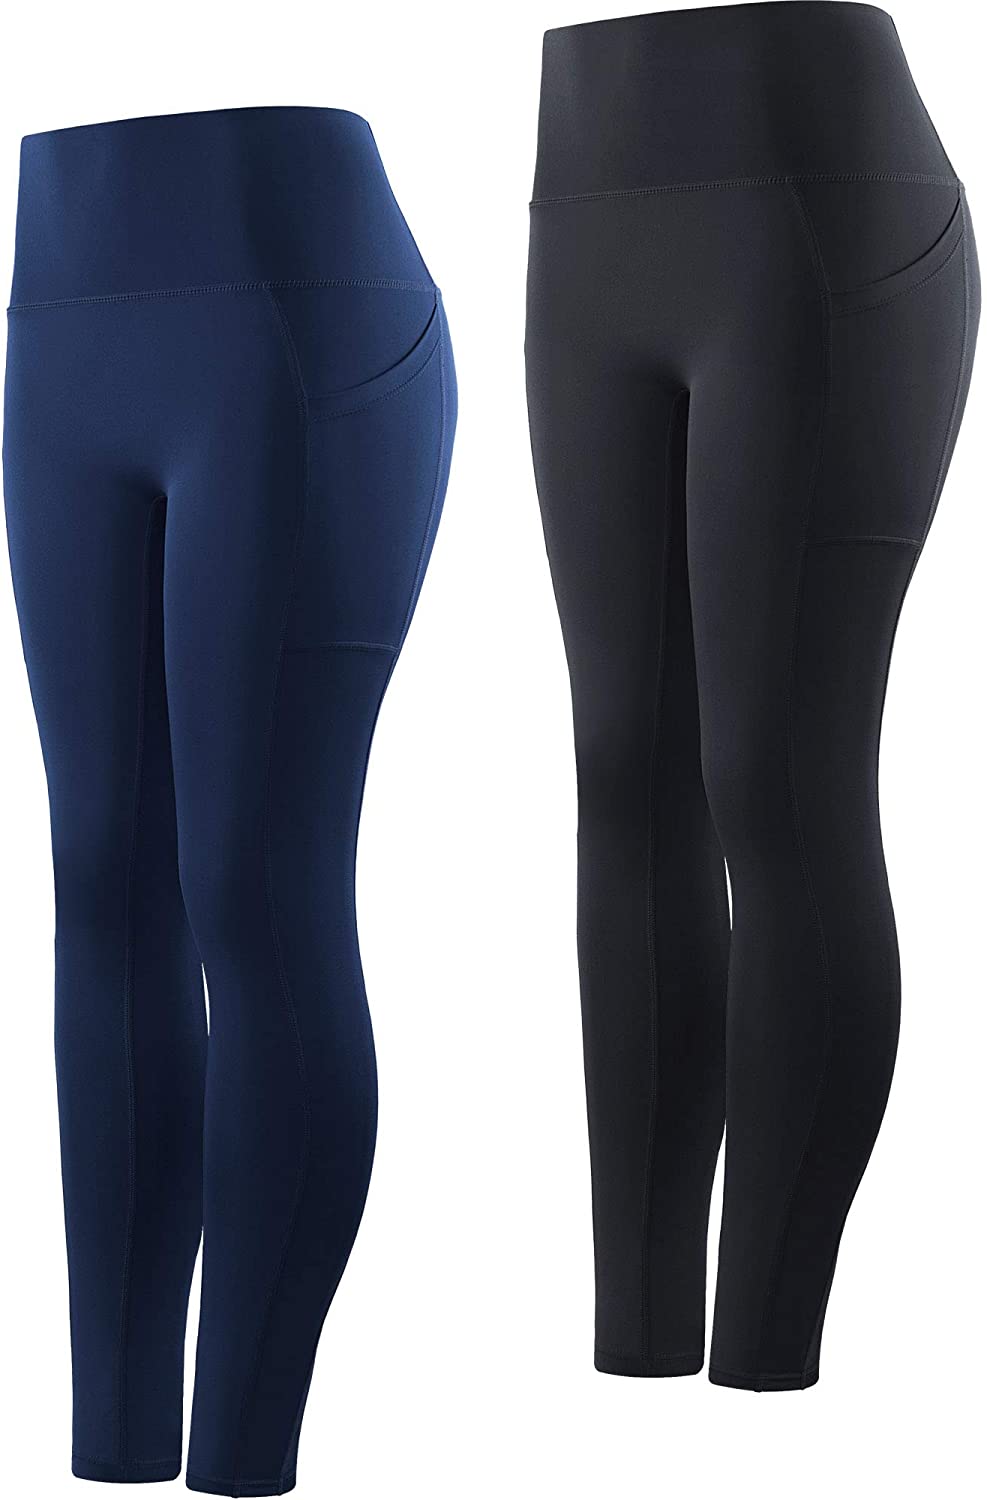 Tummy Control Yoga Pants with Pockets,2 or 3 Pack CADMUS High Waisted Workout Leggings for Women 